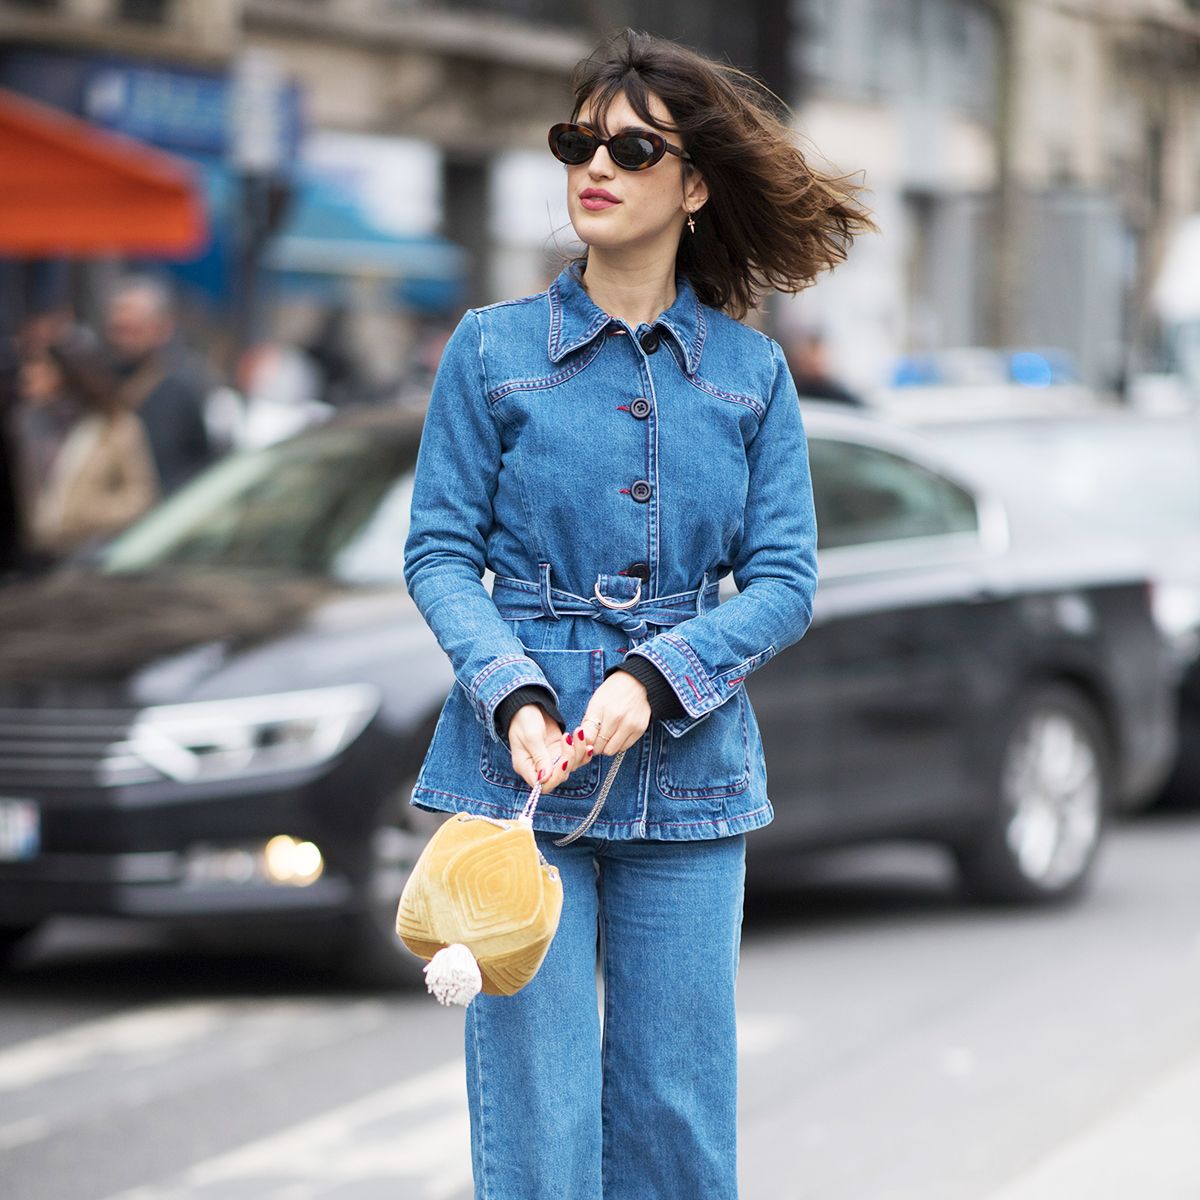 12 French Shoes All the Parisian Girls Are Wearing